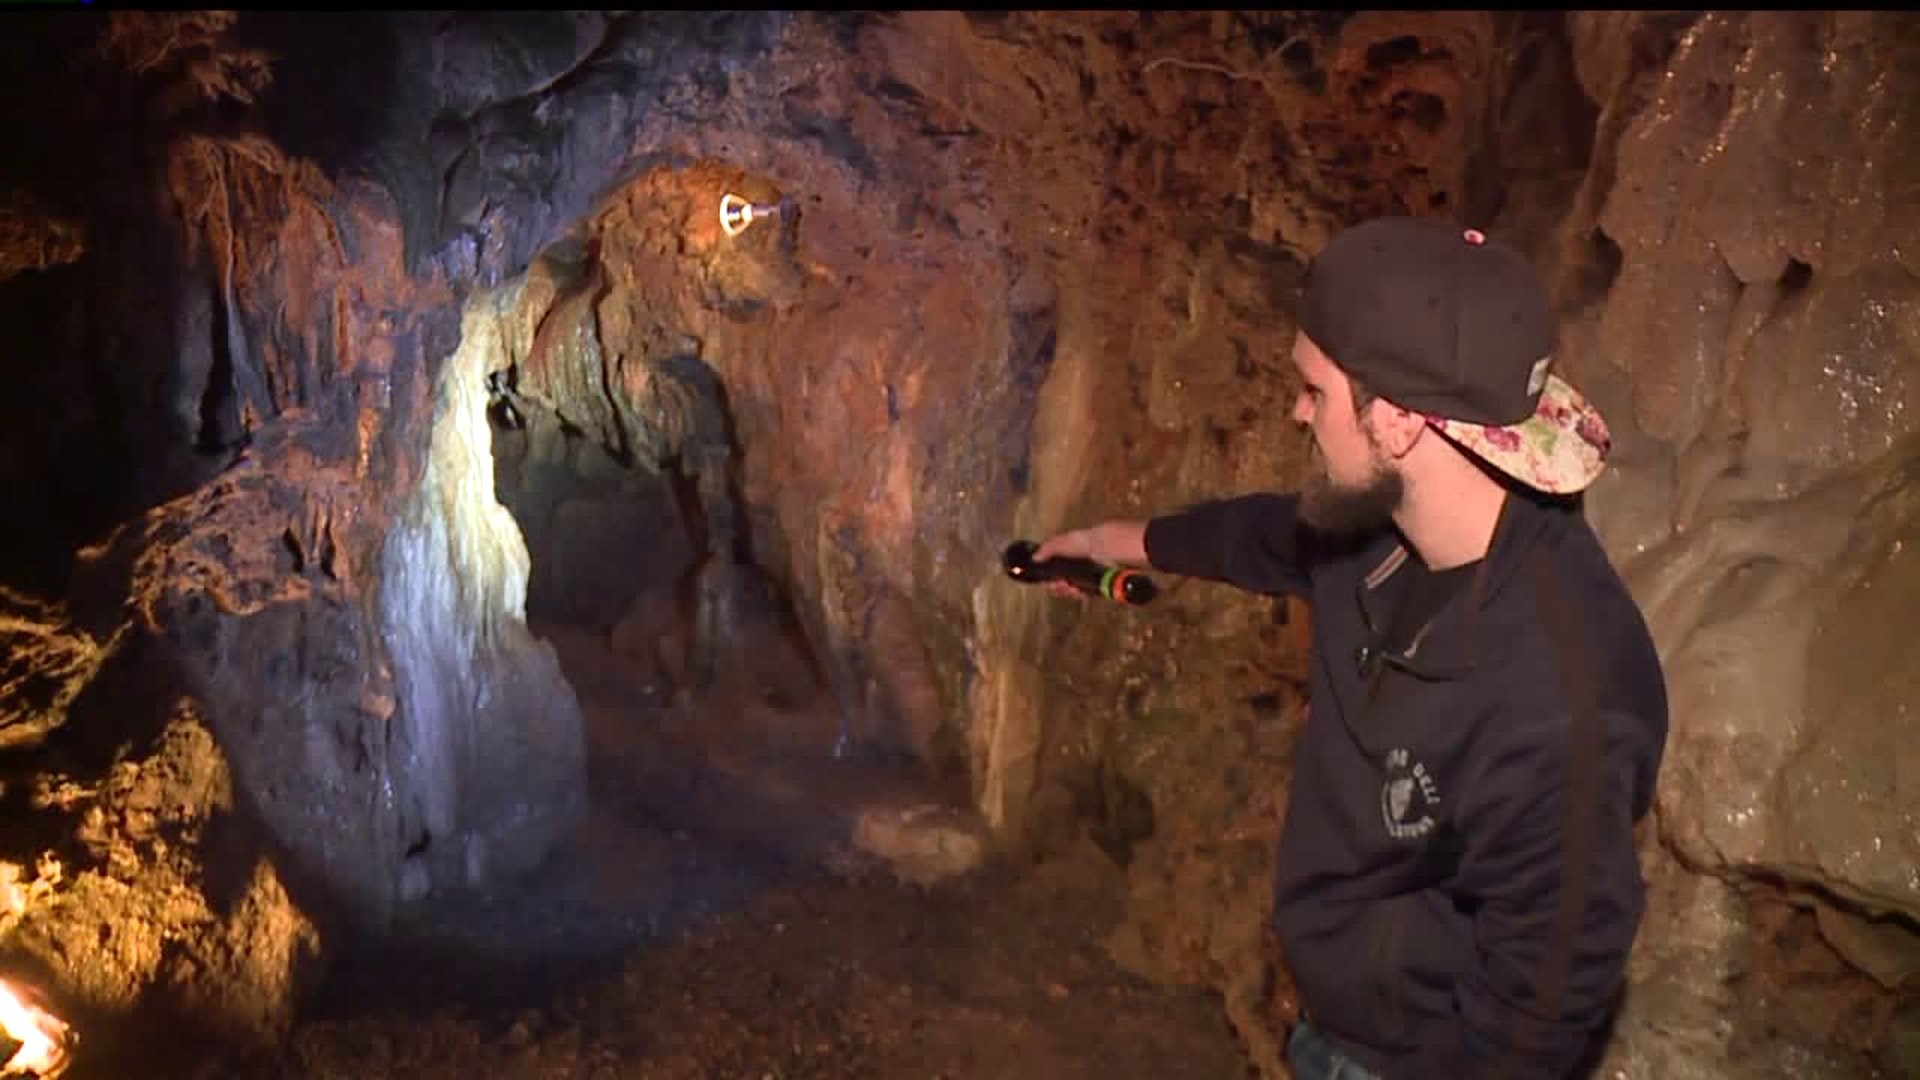 Indian Echo Caverns in Dauphin County extends full tours again after caves flood